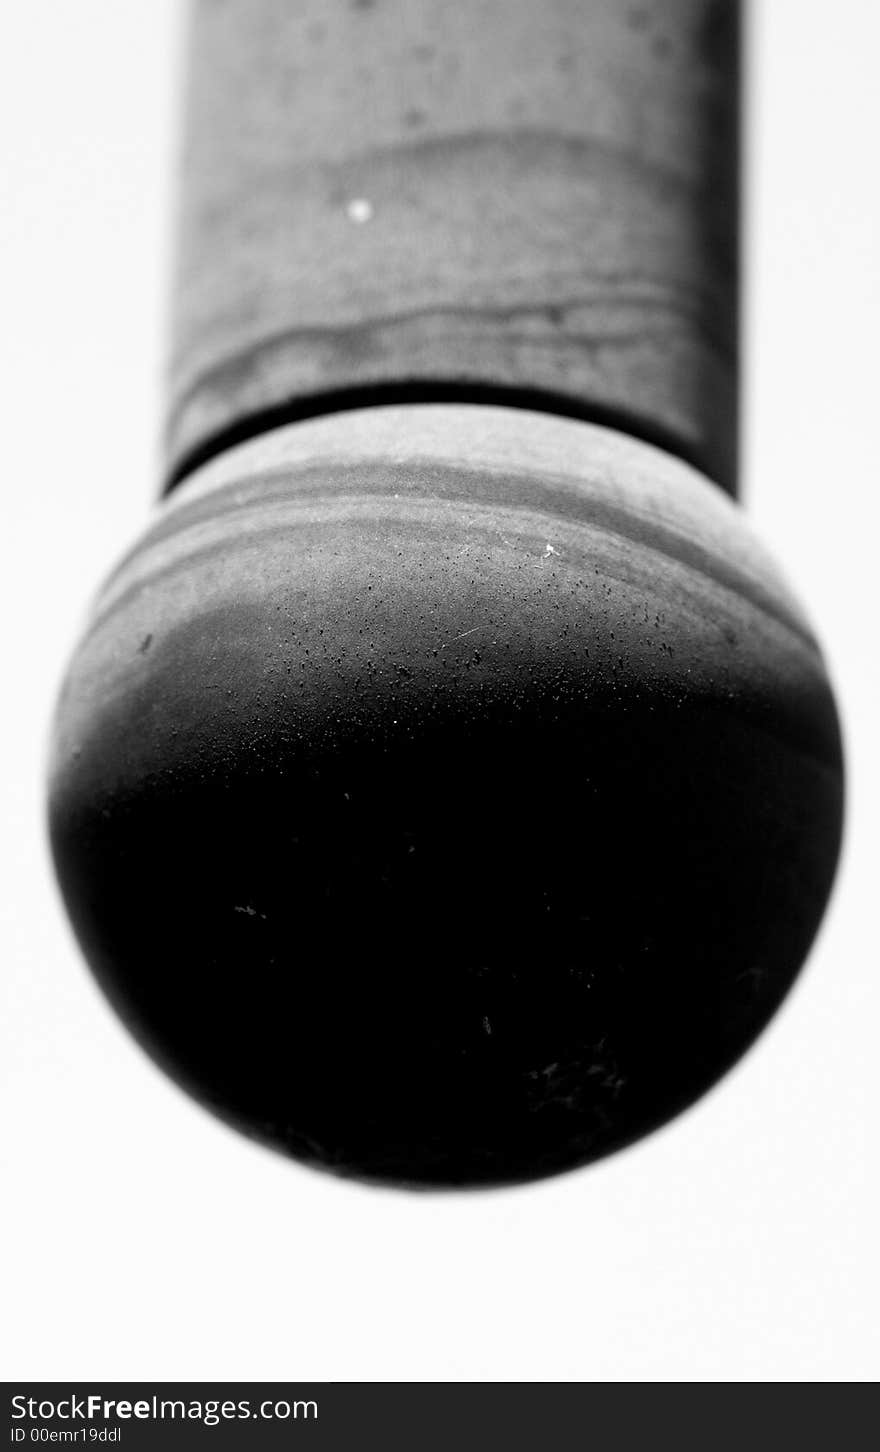 The knob is extreme macro of a knob of a lamp